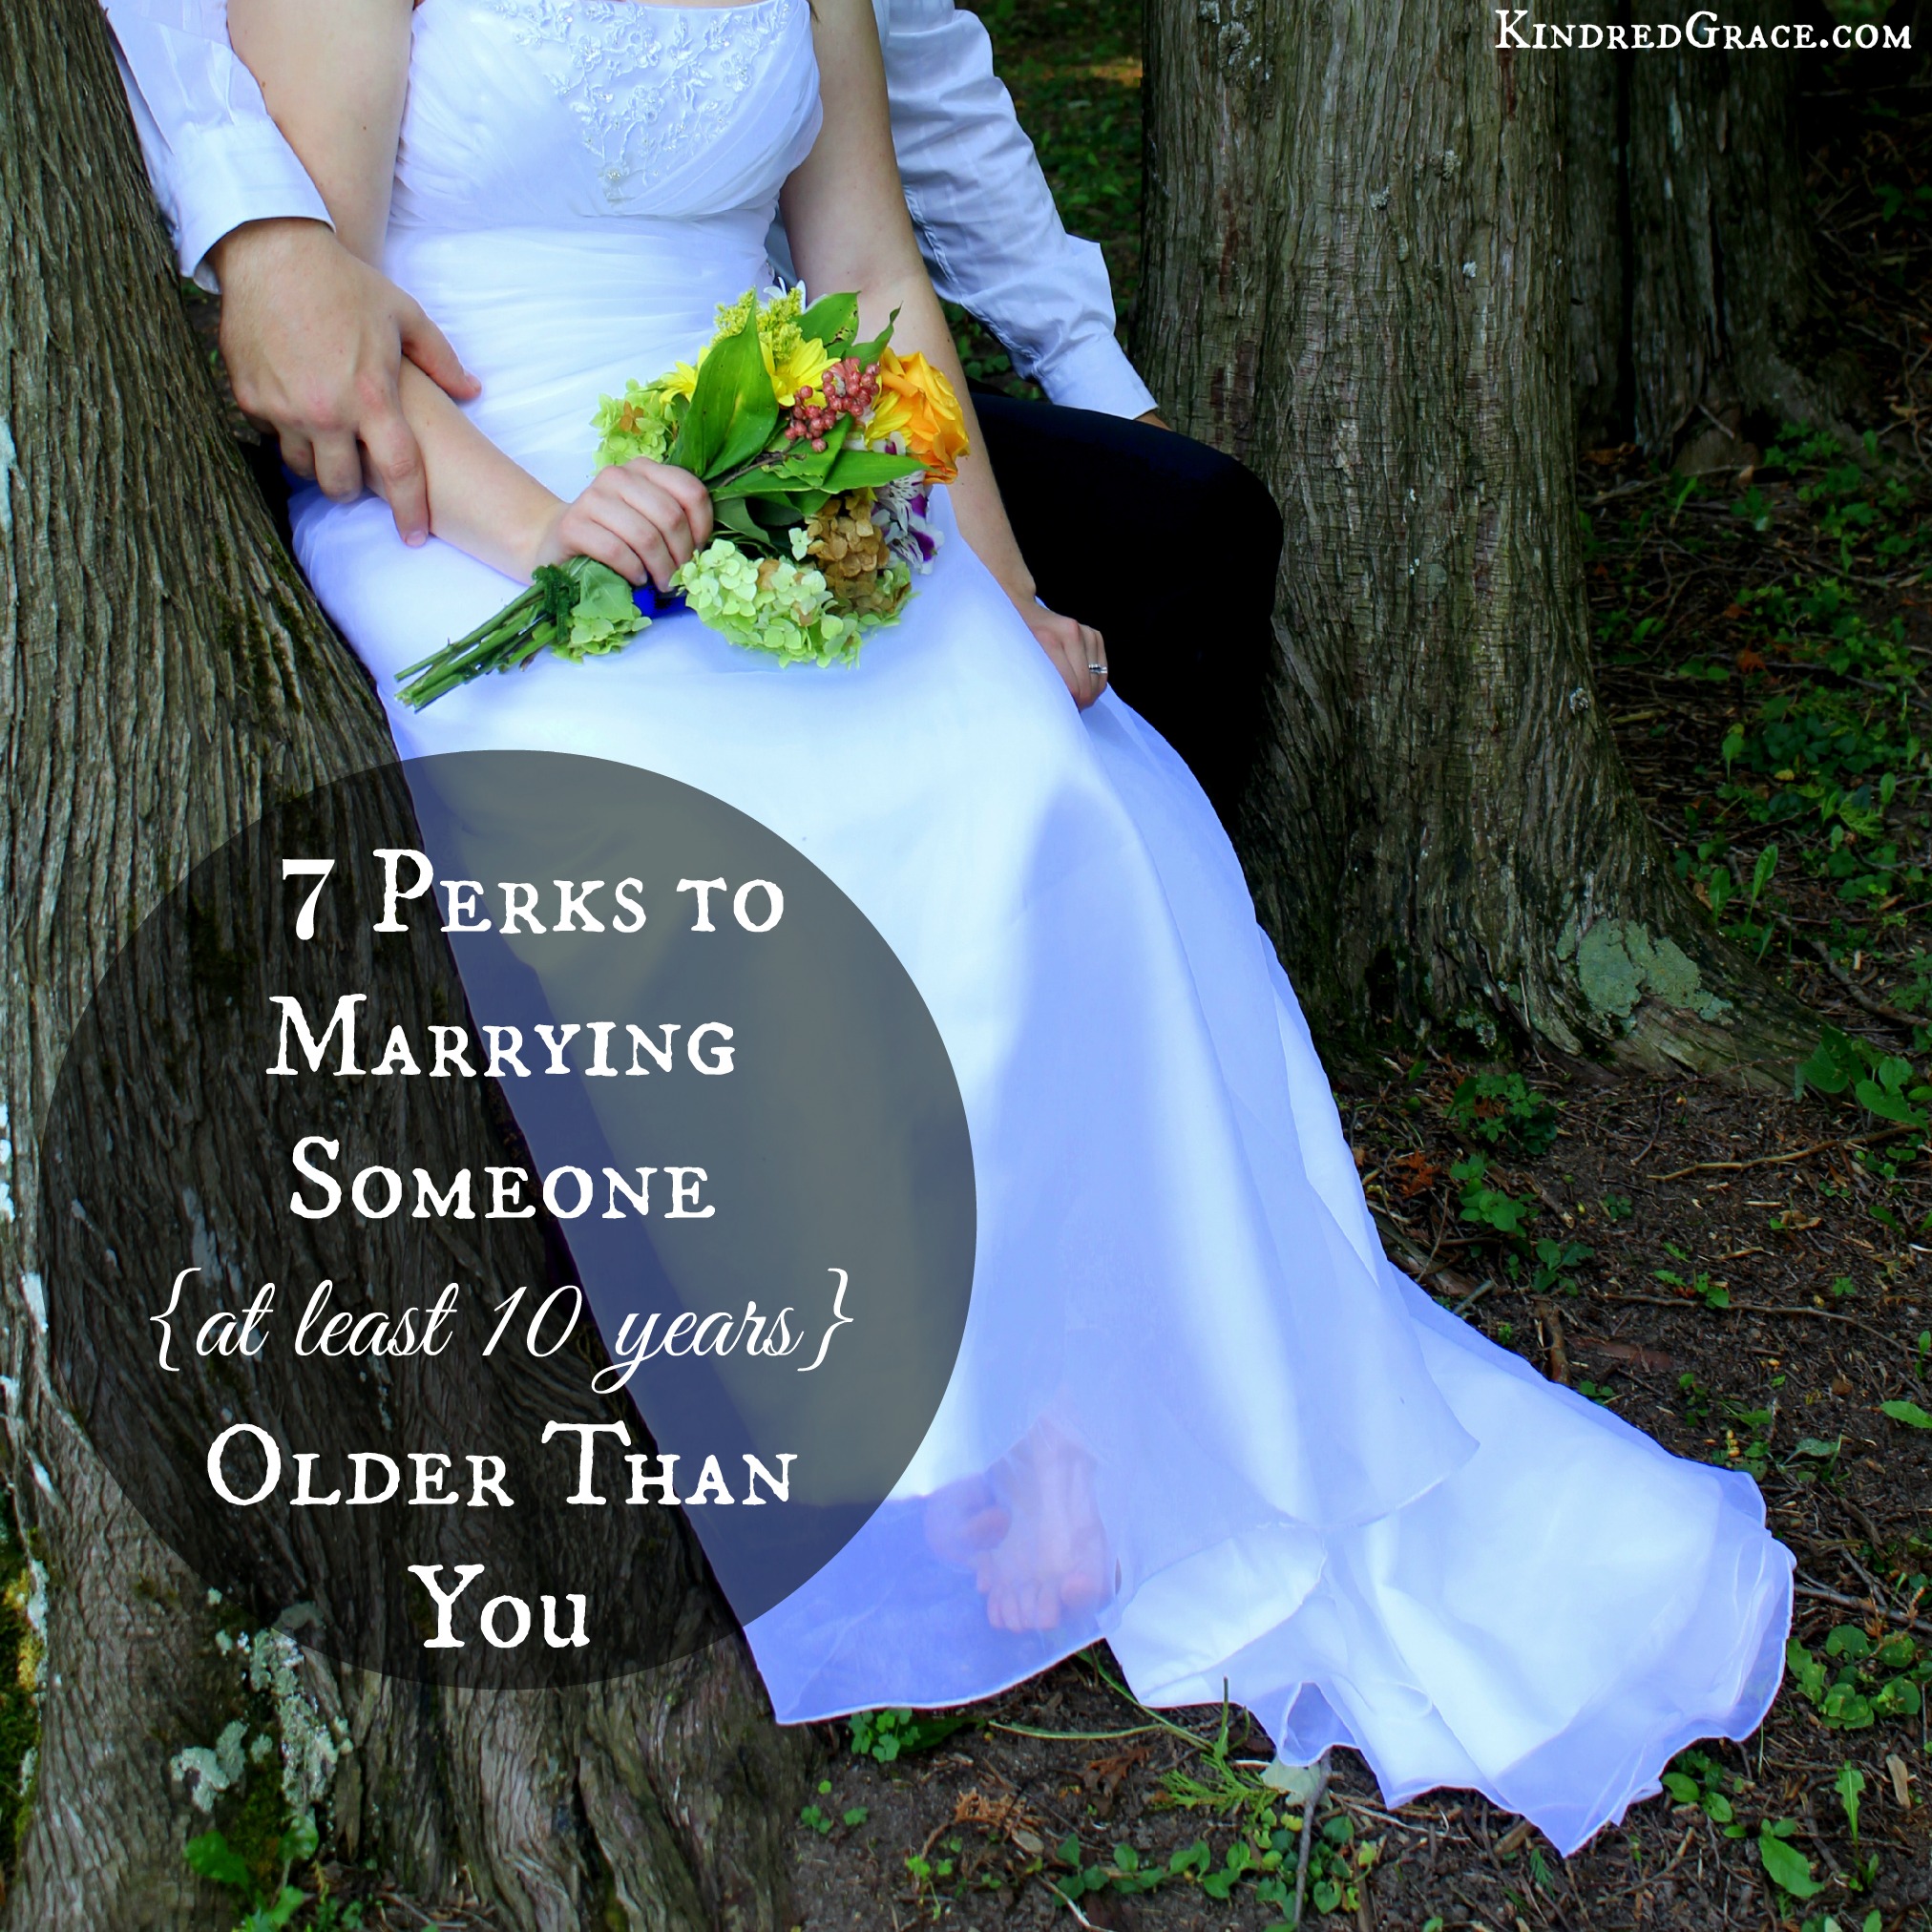 Seven Perks to Marrying Someone Older Than You